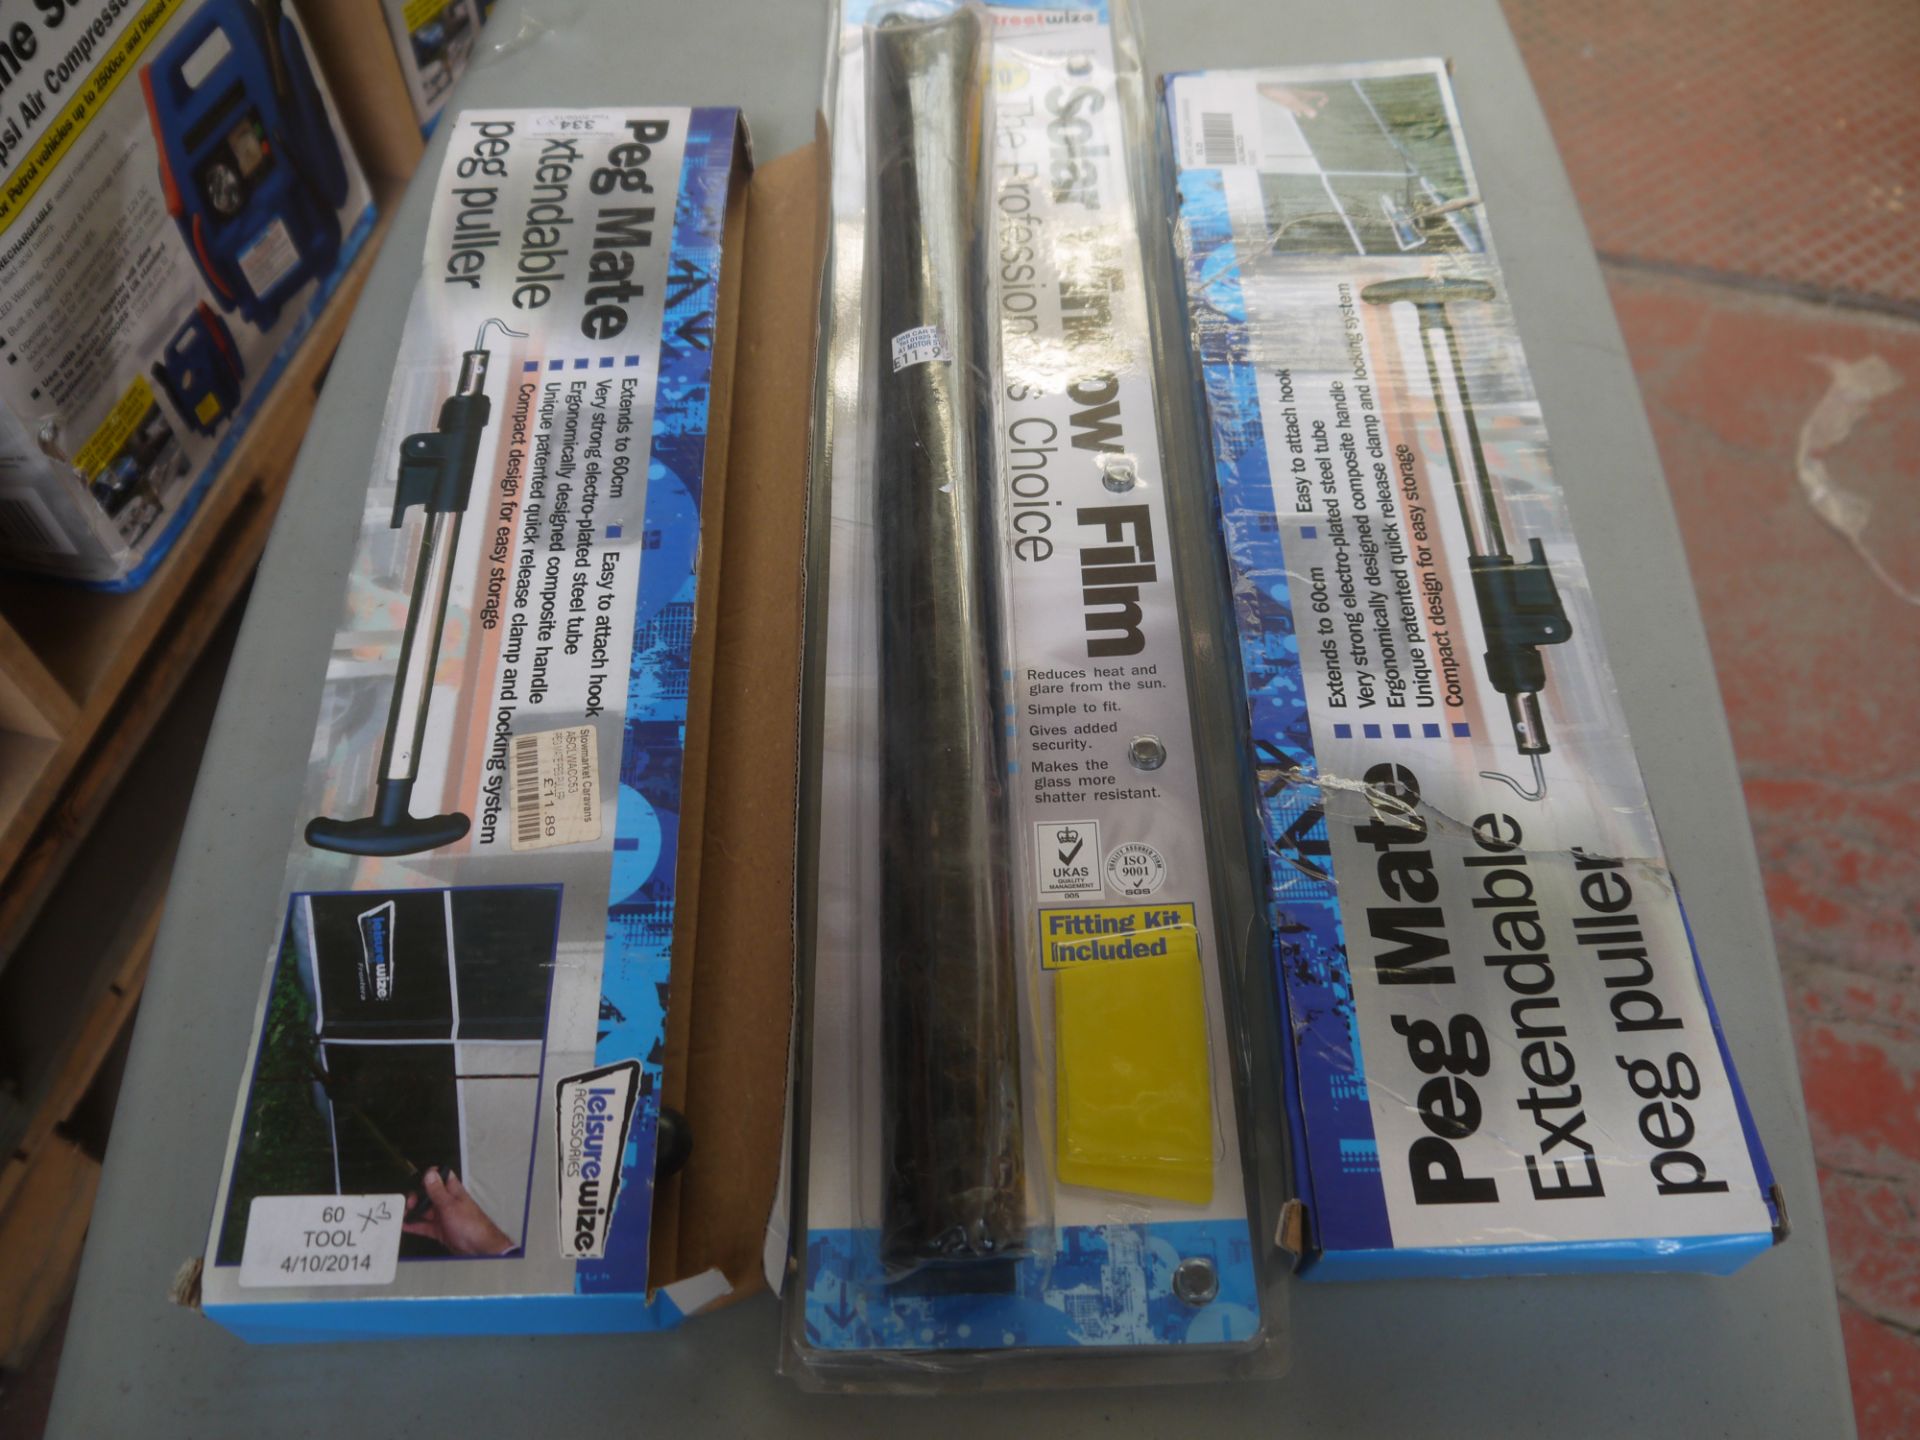 3x Items being a Roll of Tinted window film and 2 extendable tent pug pullers